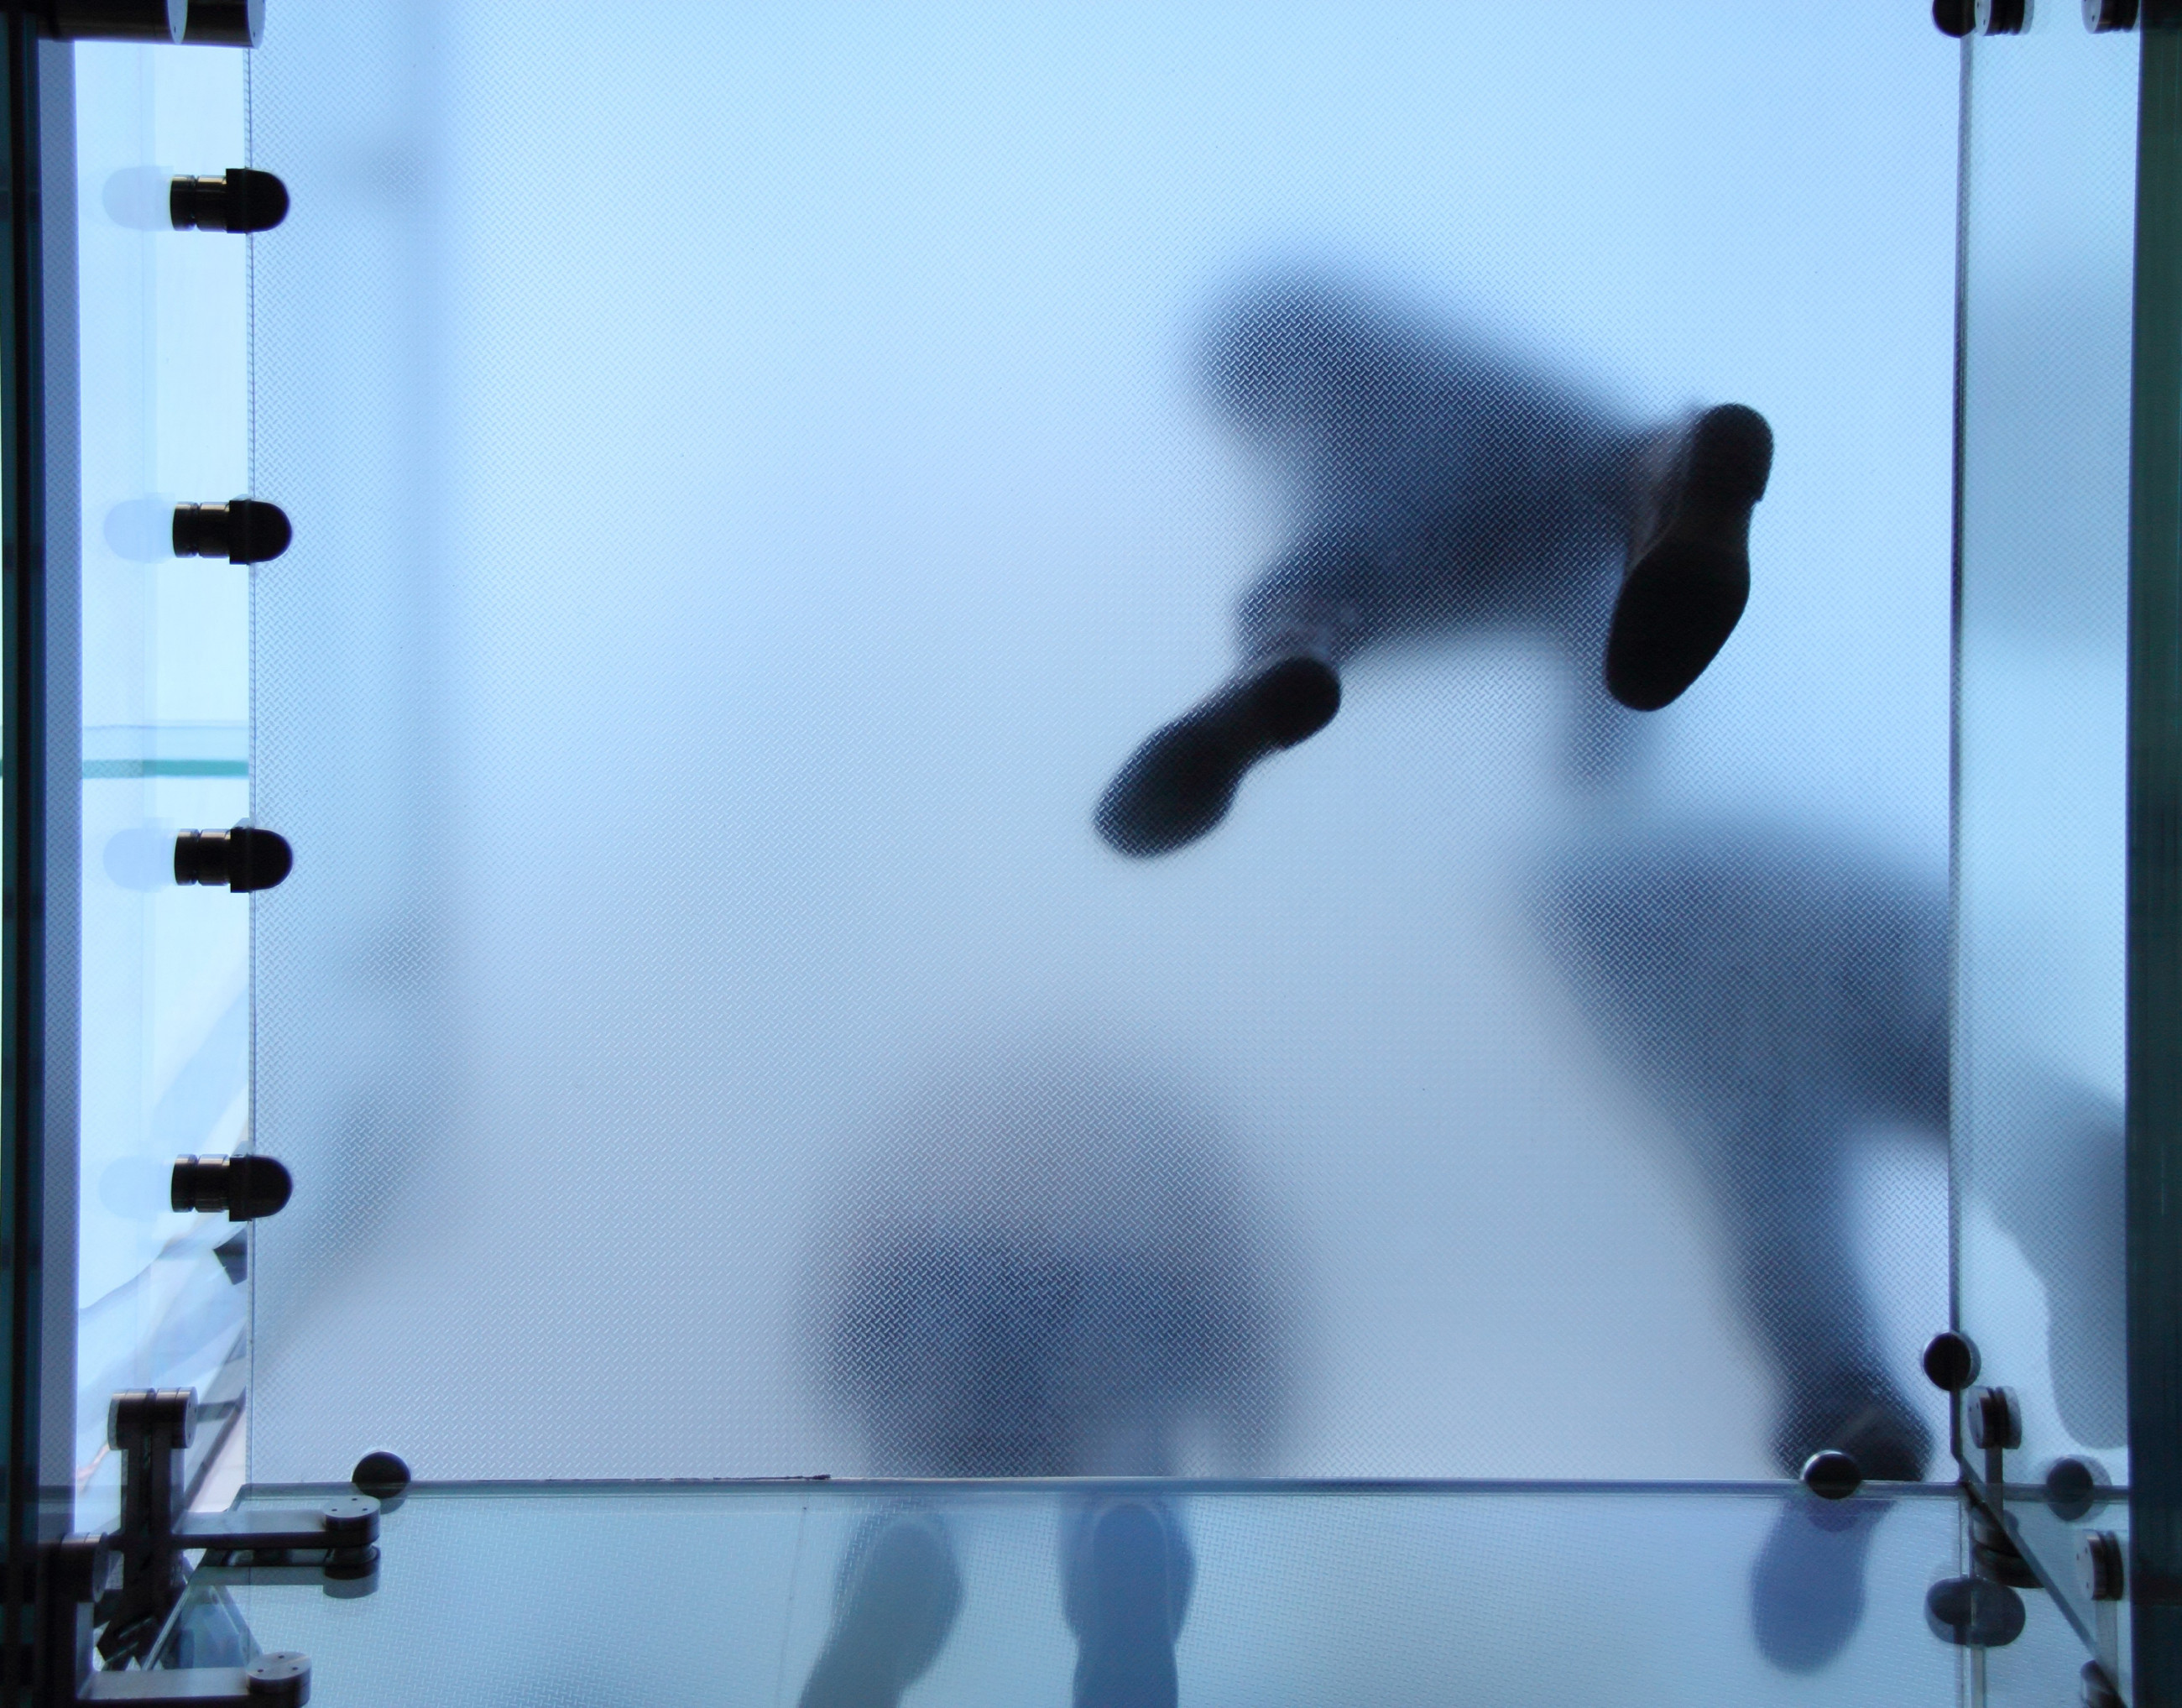 Frosted floor glass with peoples footprints